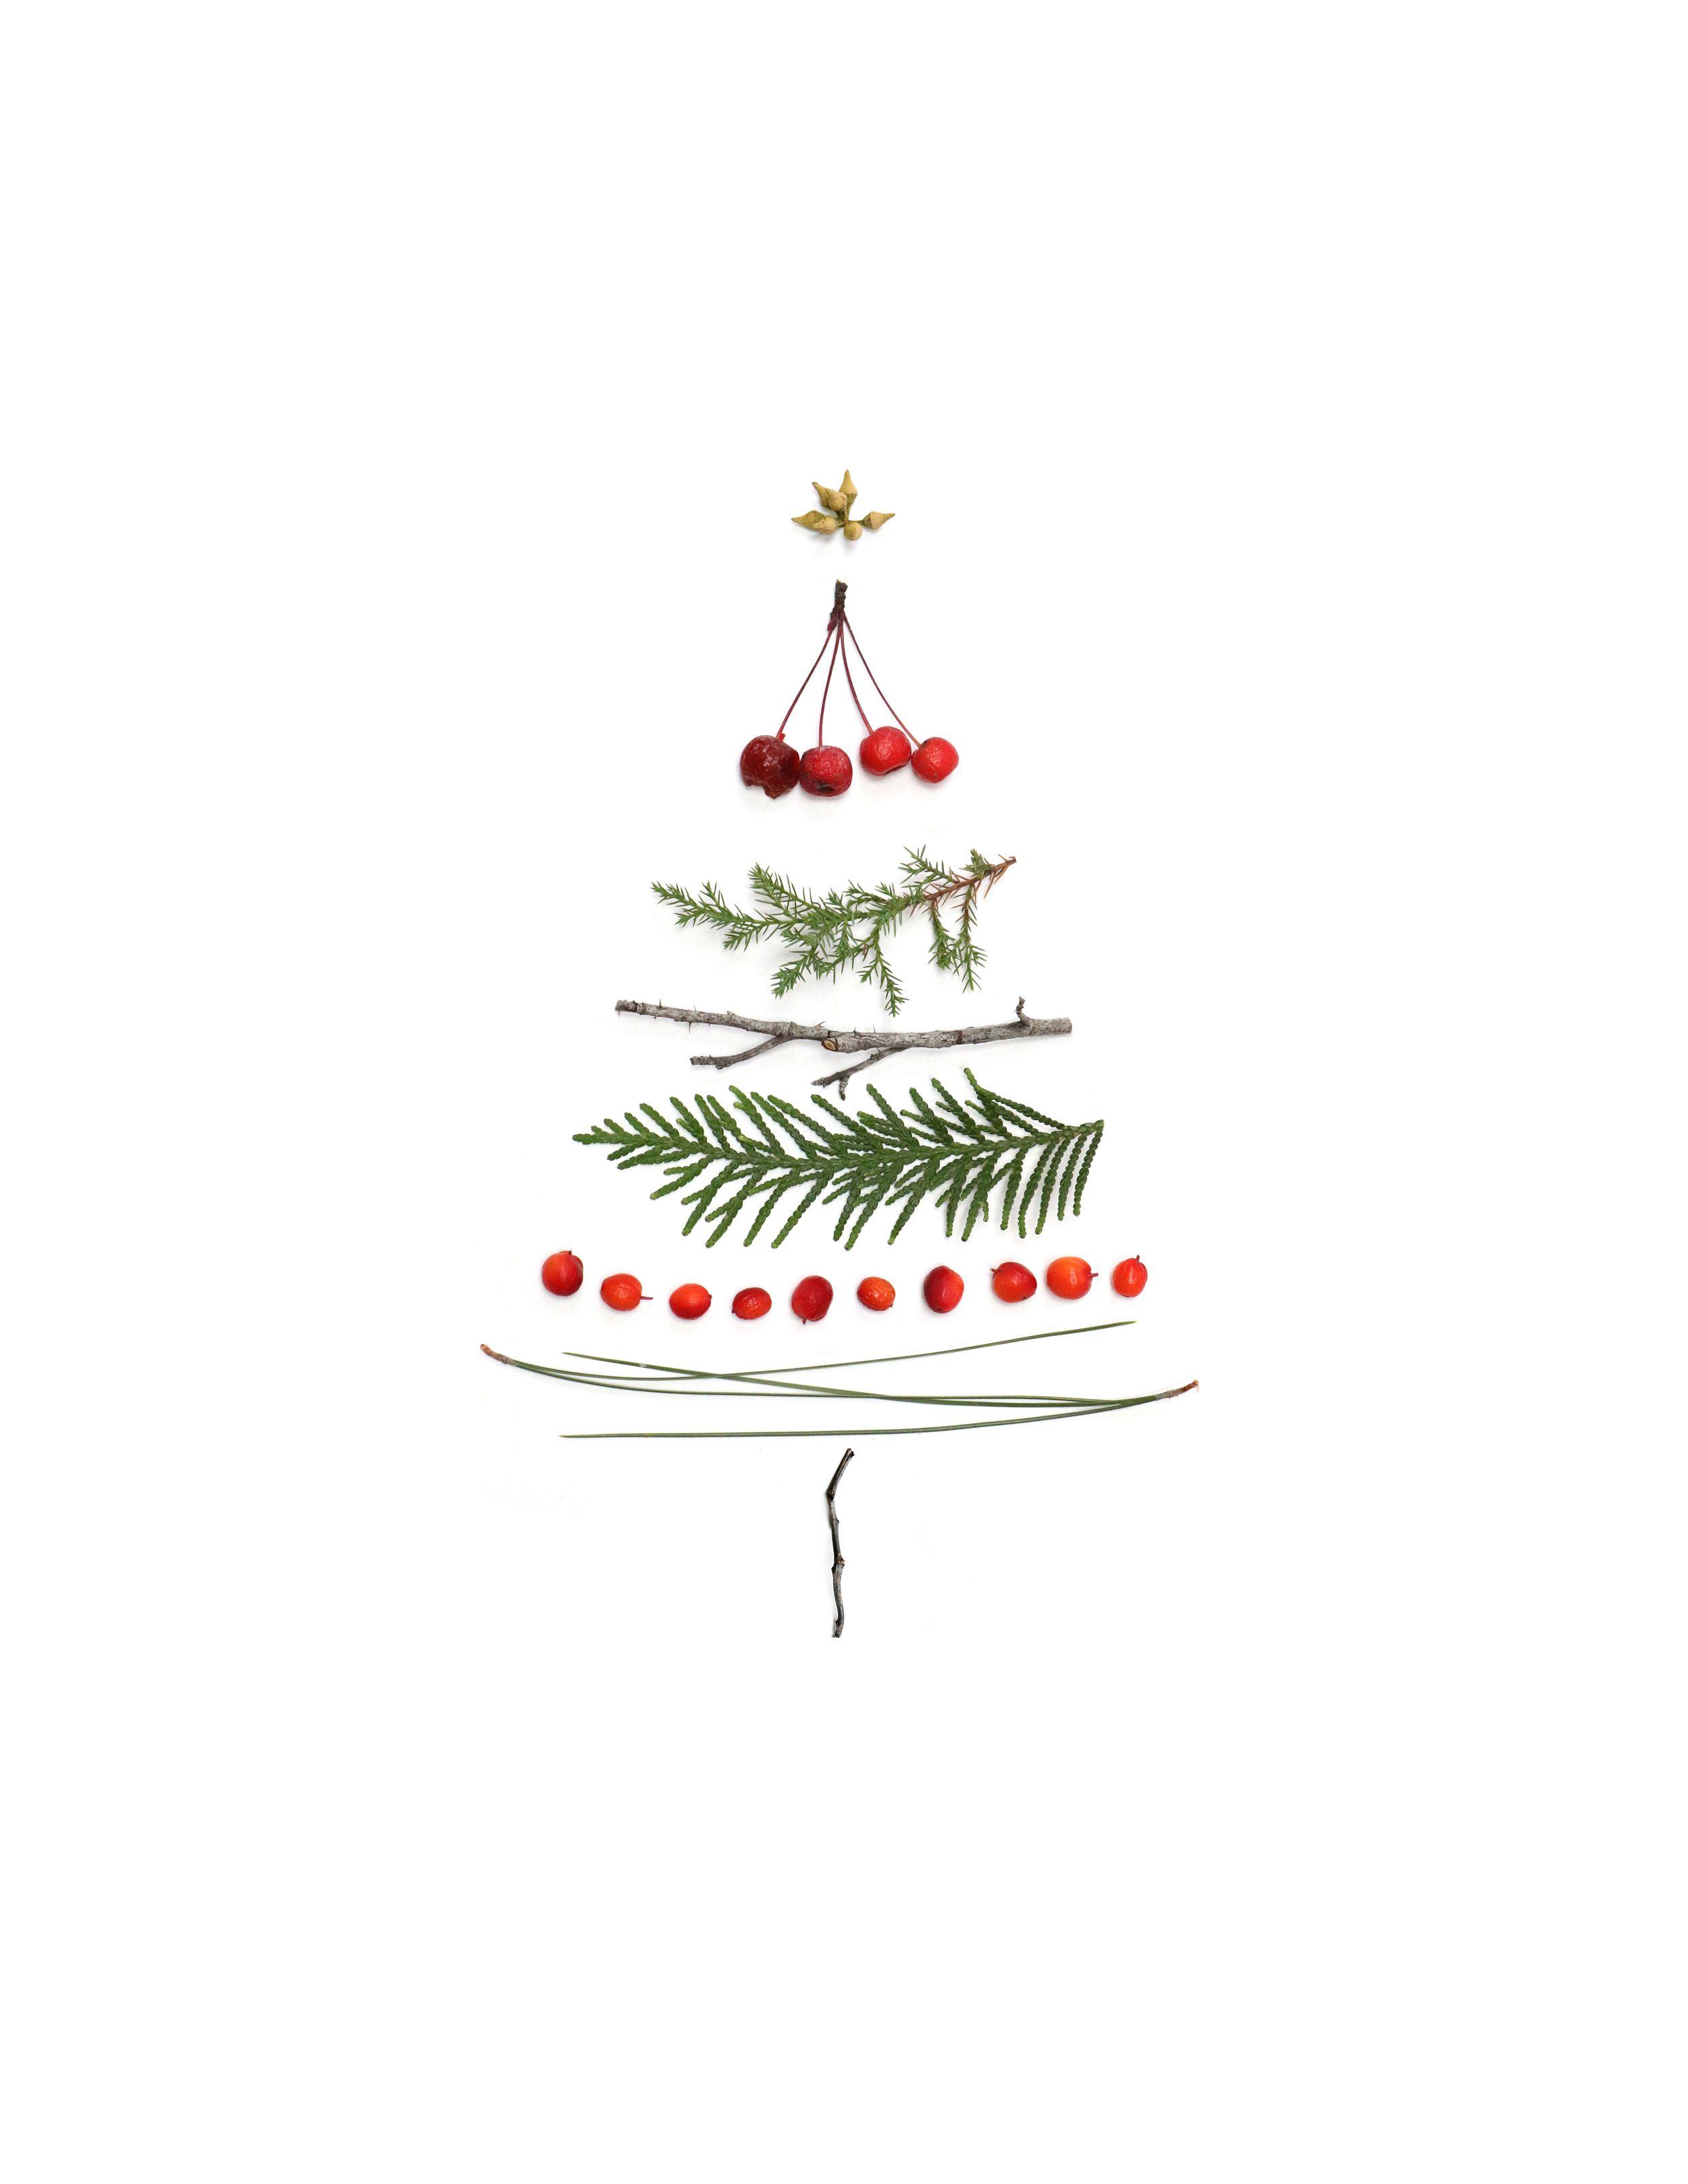 A Christmas tree made out of natural elements - Christmas, cute Christmas, white Christmas